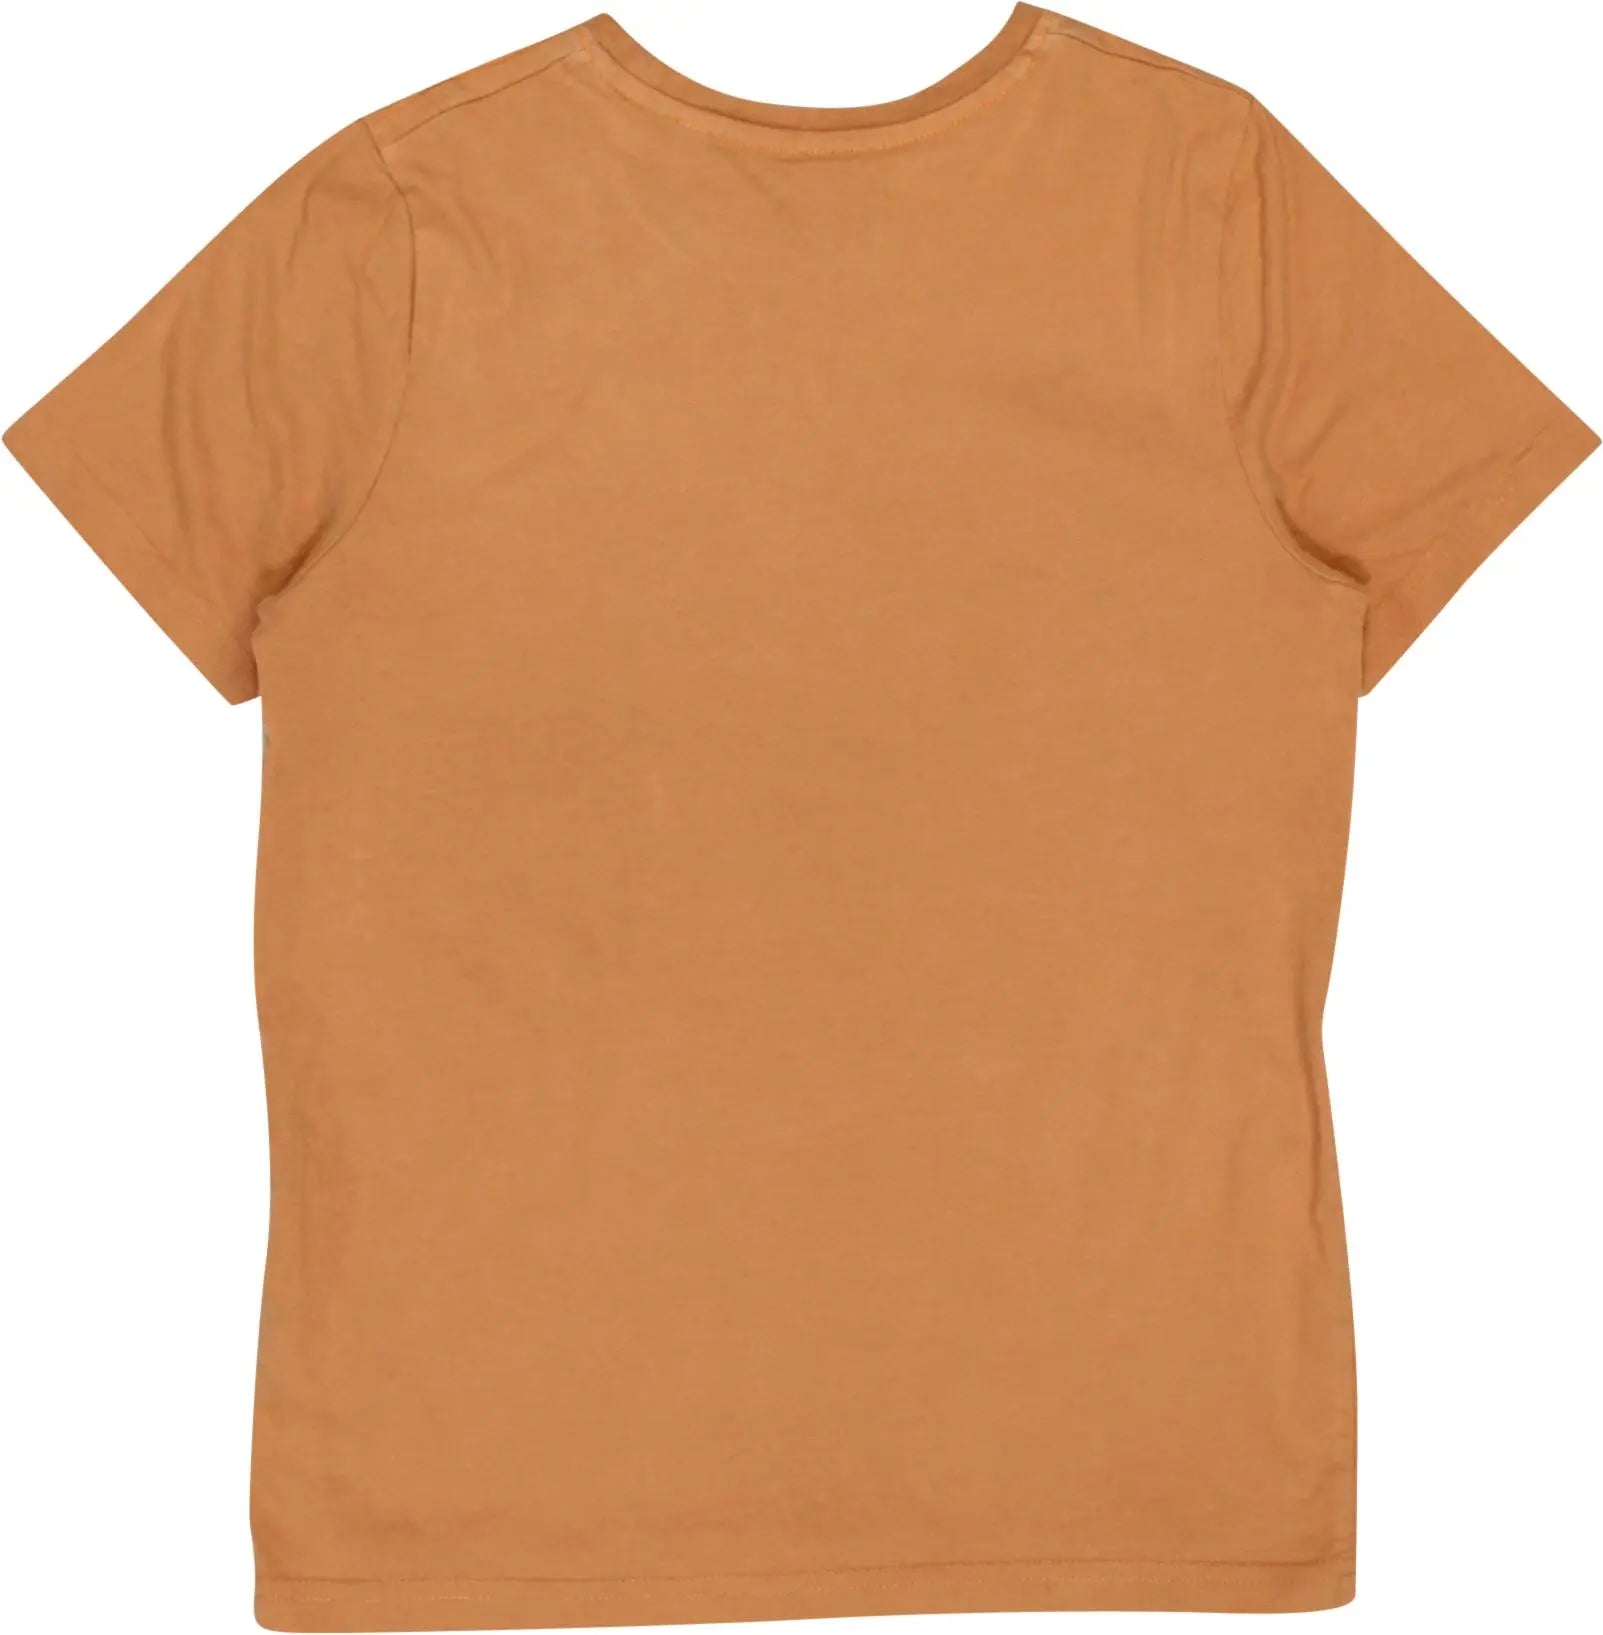 C&A - Orange T-shirt- ThriftTale.com - Vintage and second handclothing